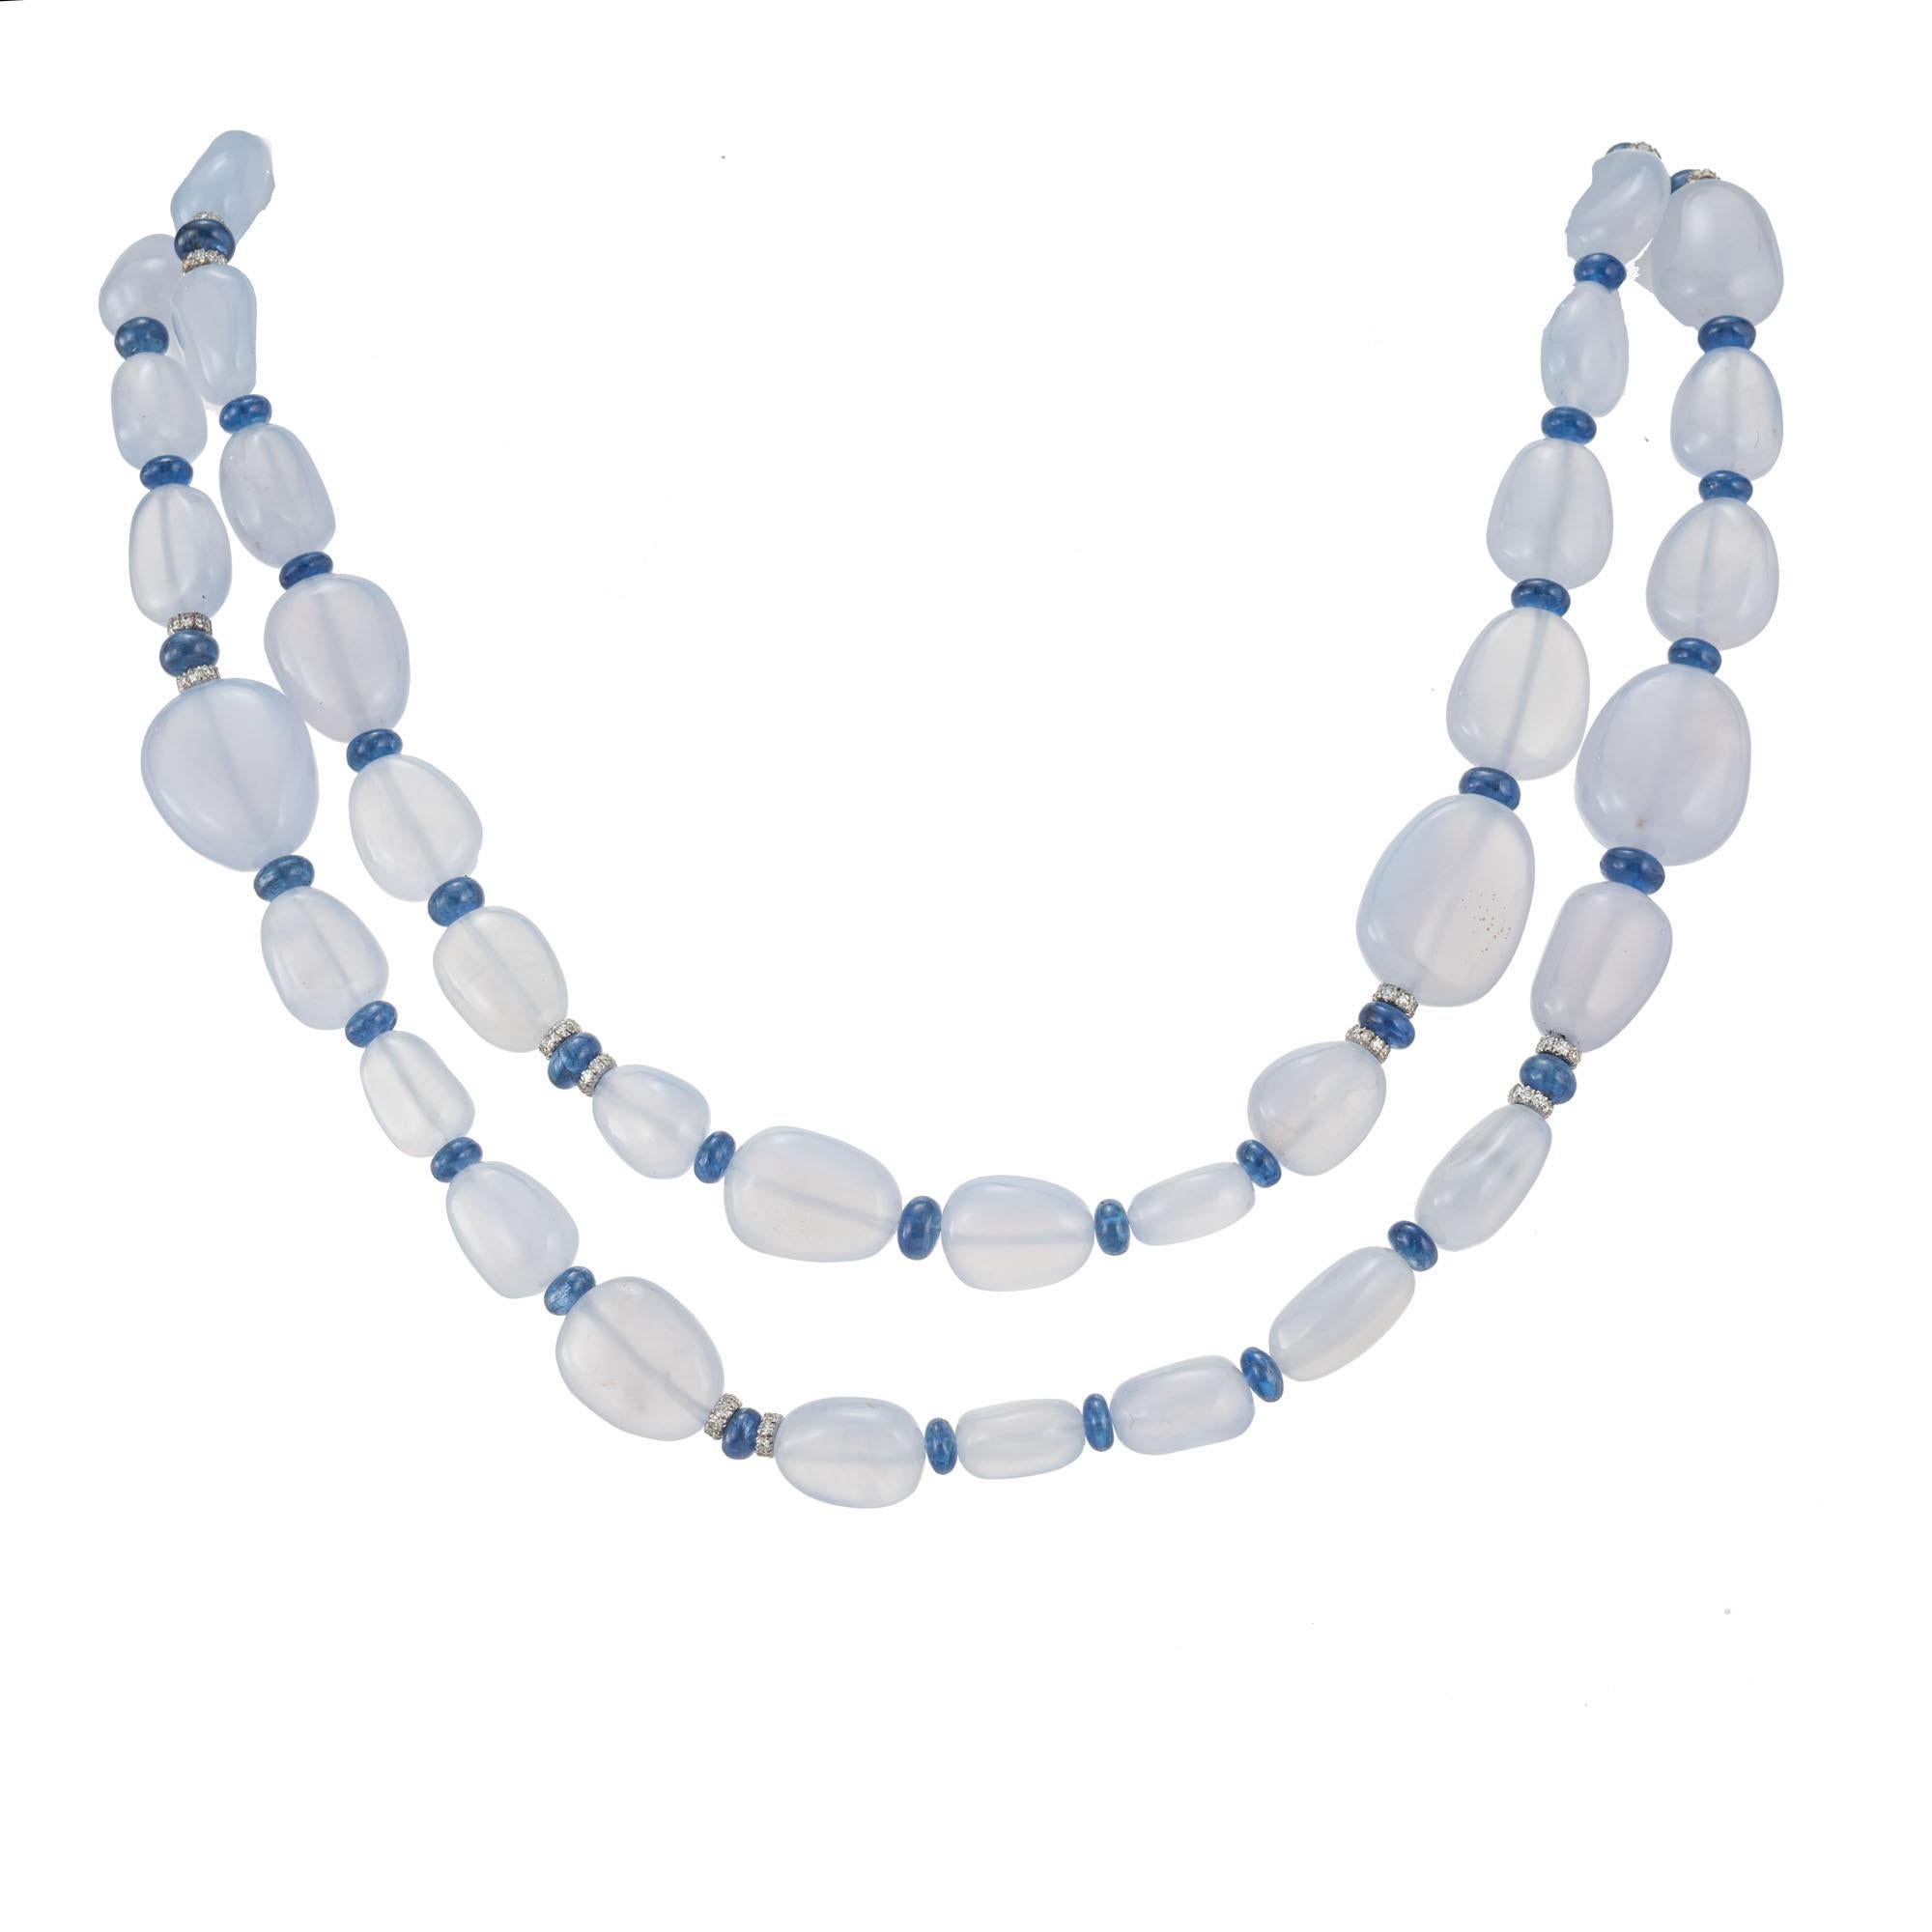 Translucent natural blue chalcedony bead necklace with genuine blue sapphire rondels spacers and 18k white gold diamond rondel with an 18k white gold diamond catch. 30 inches long. 

50 blue chalcedony pale blue beads
51 blue sapphire rondel